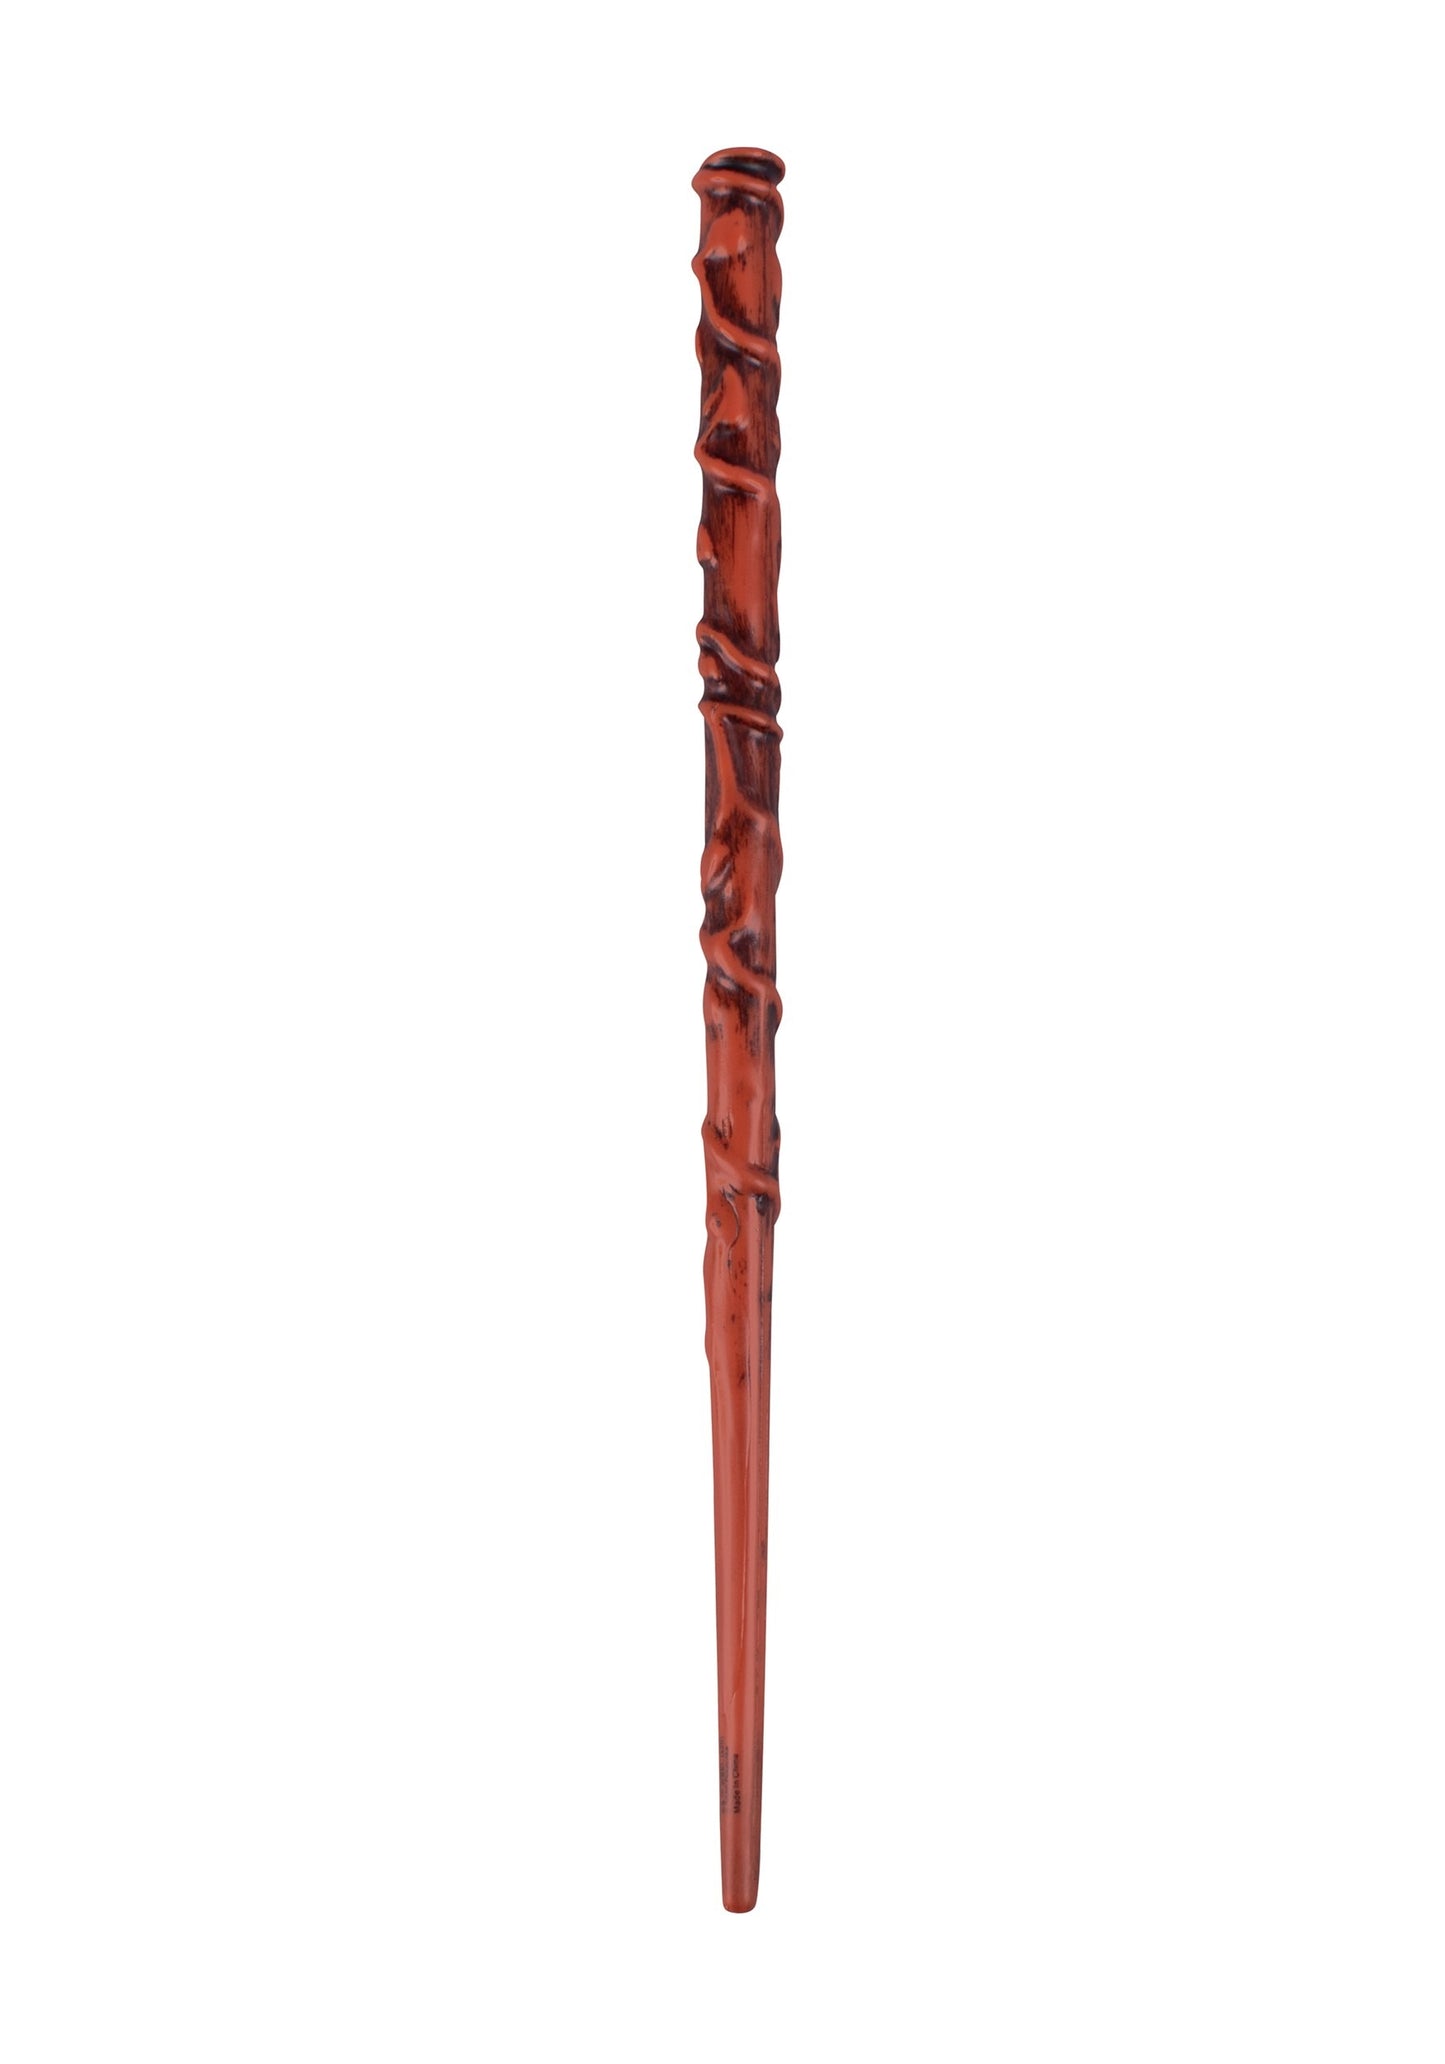 Disguise Hermione Granger Wand, Official Hogwarts Wizarding World Harry Potter Costume Accessory Wand Brown ,13.5 Inch Length